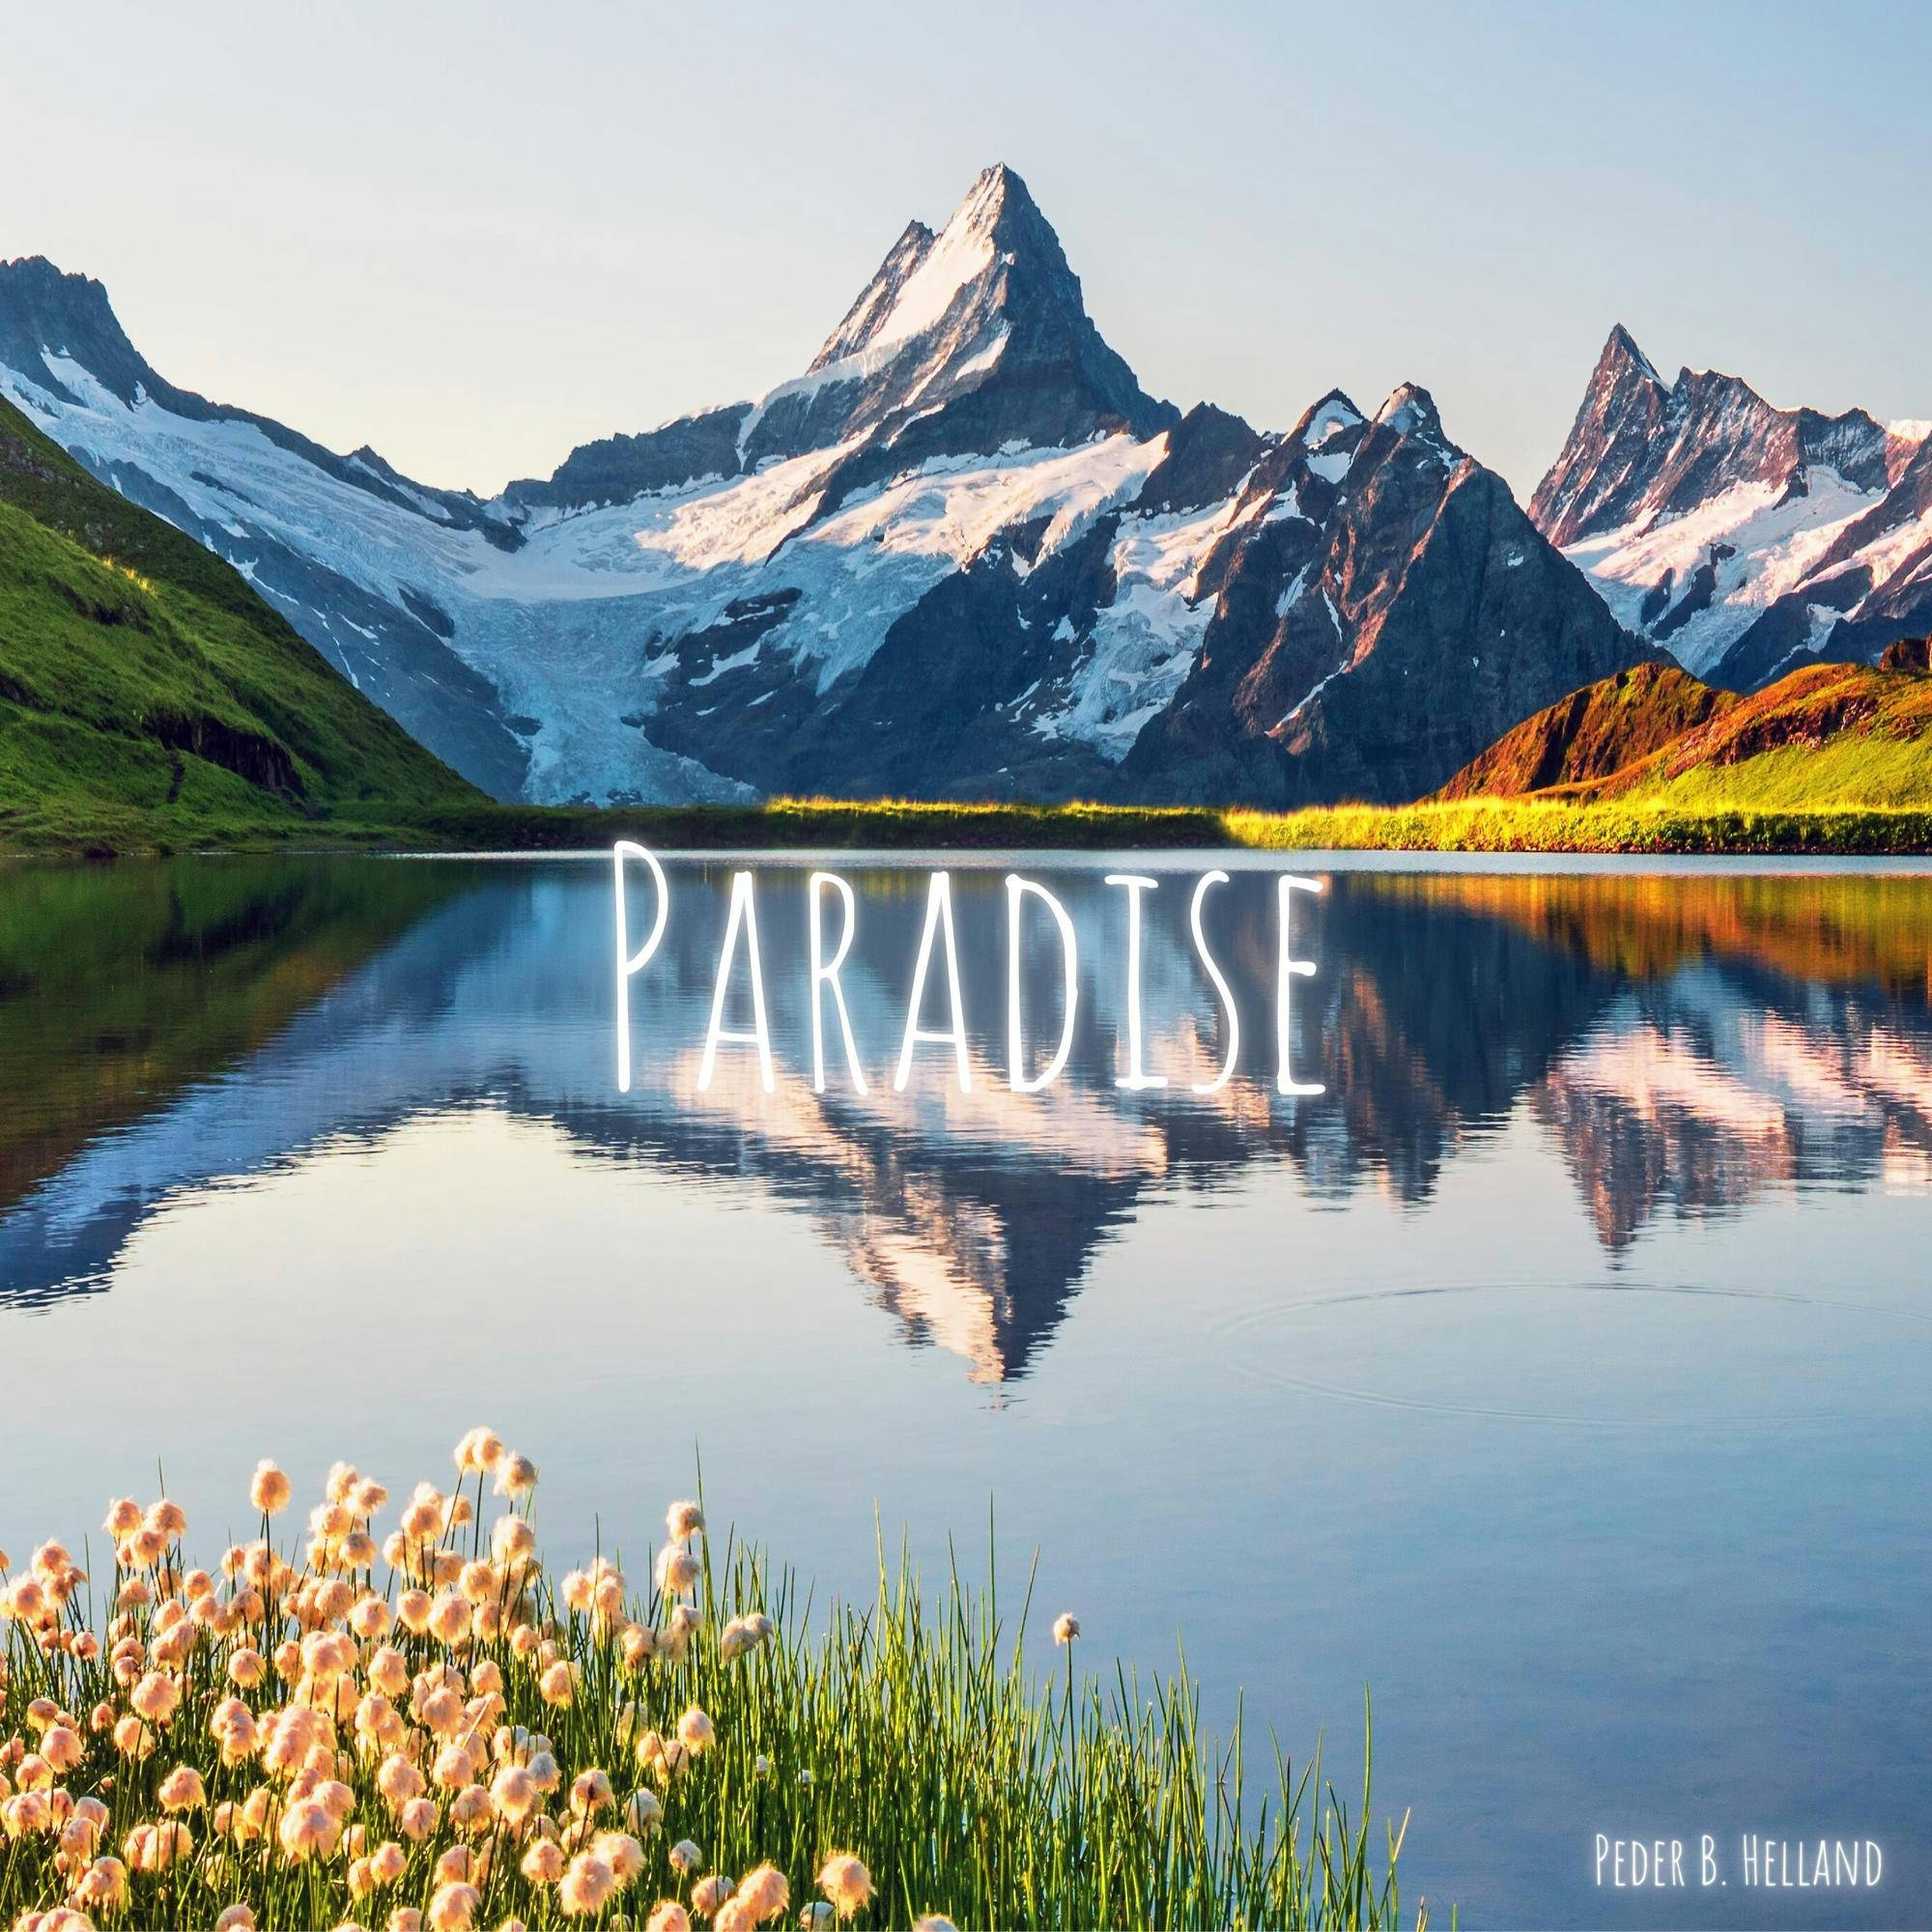 Cover art for the single Paradise by Peder B. Helland